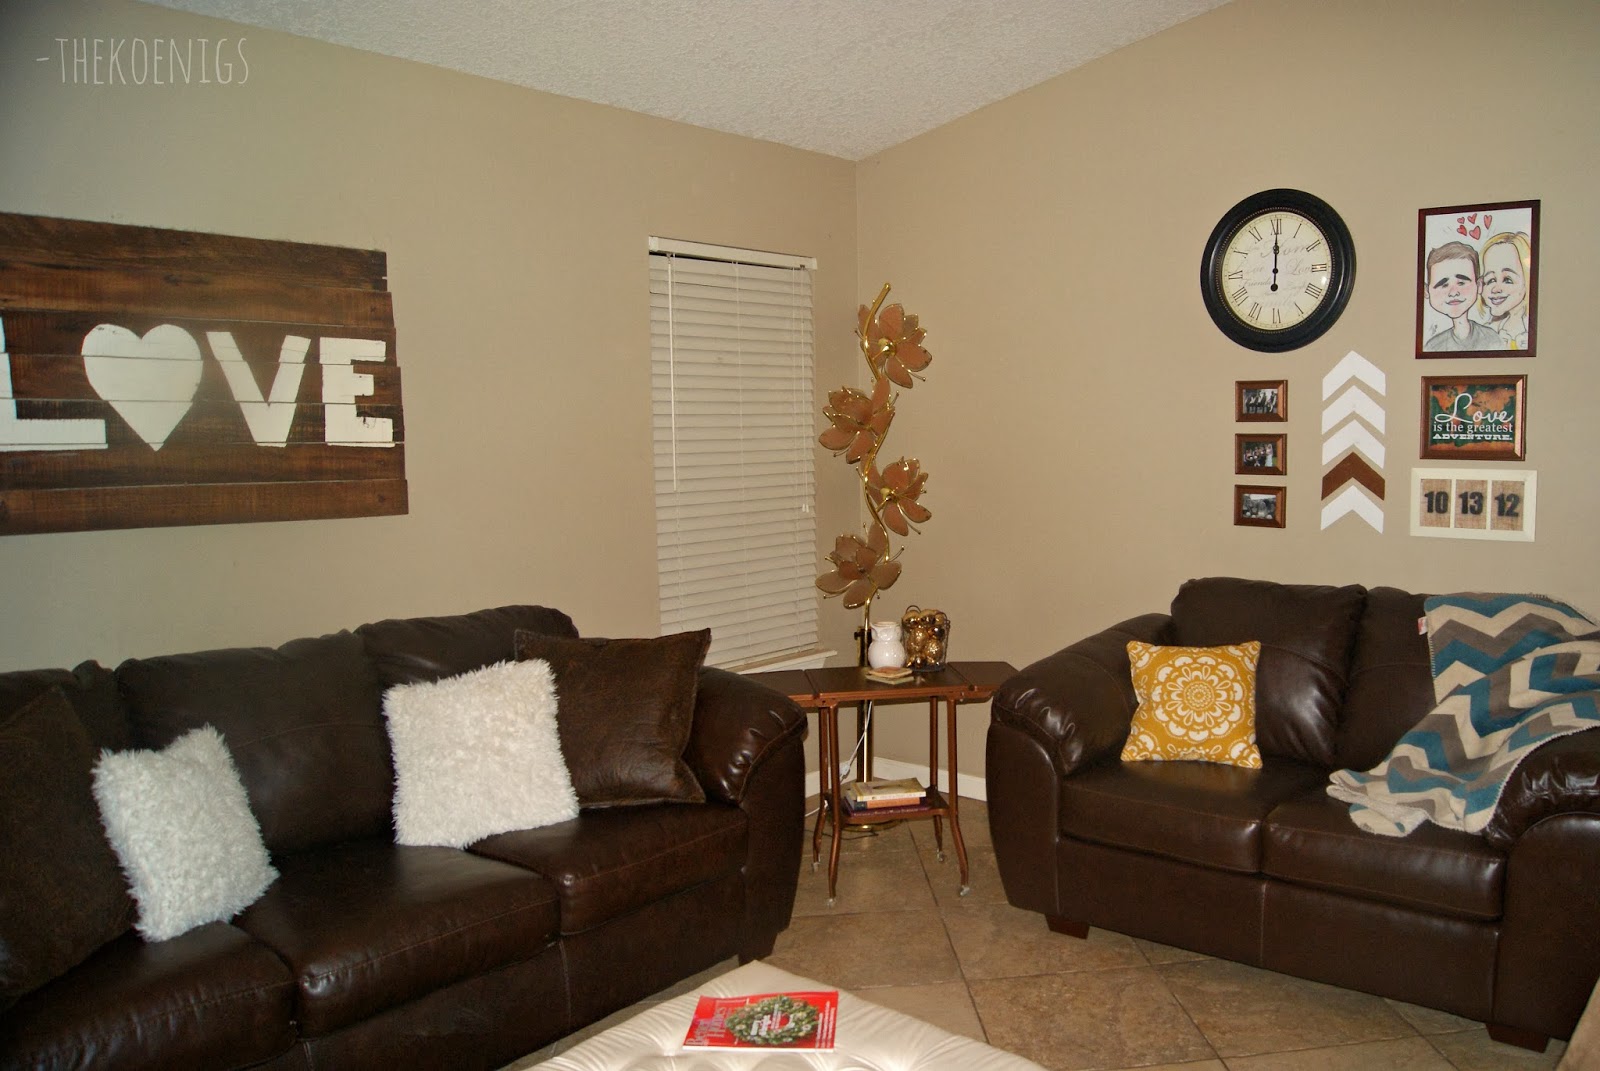 The Koenigs Create: New Couches & Living Room Reveal